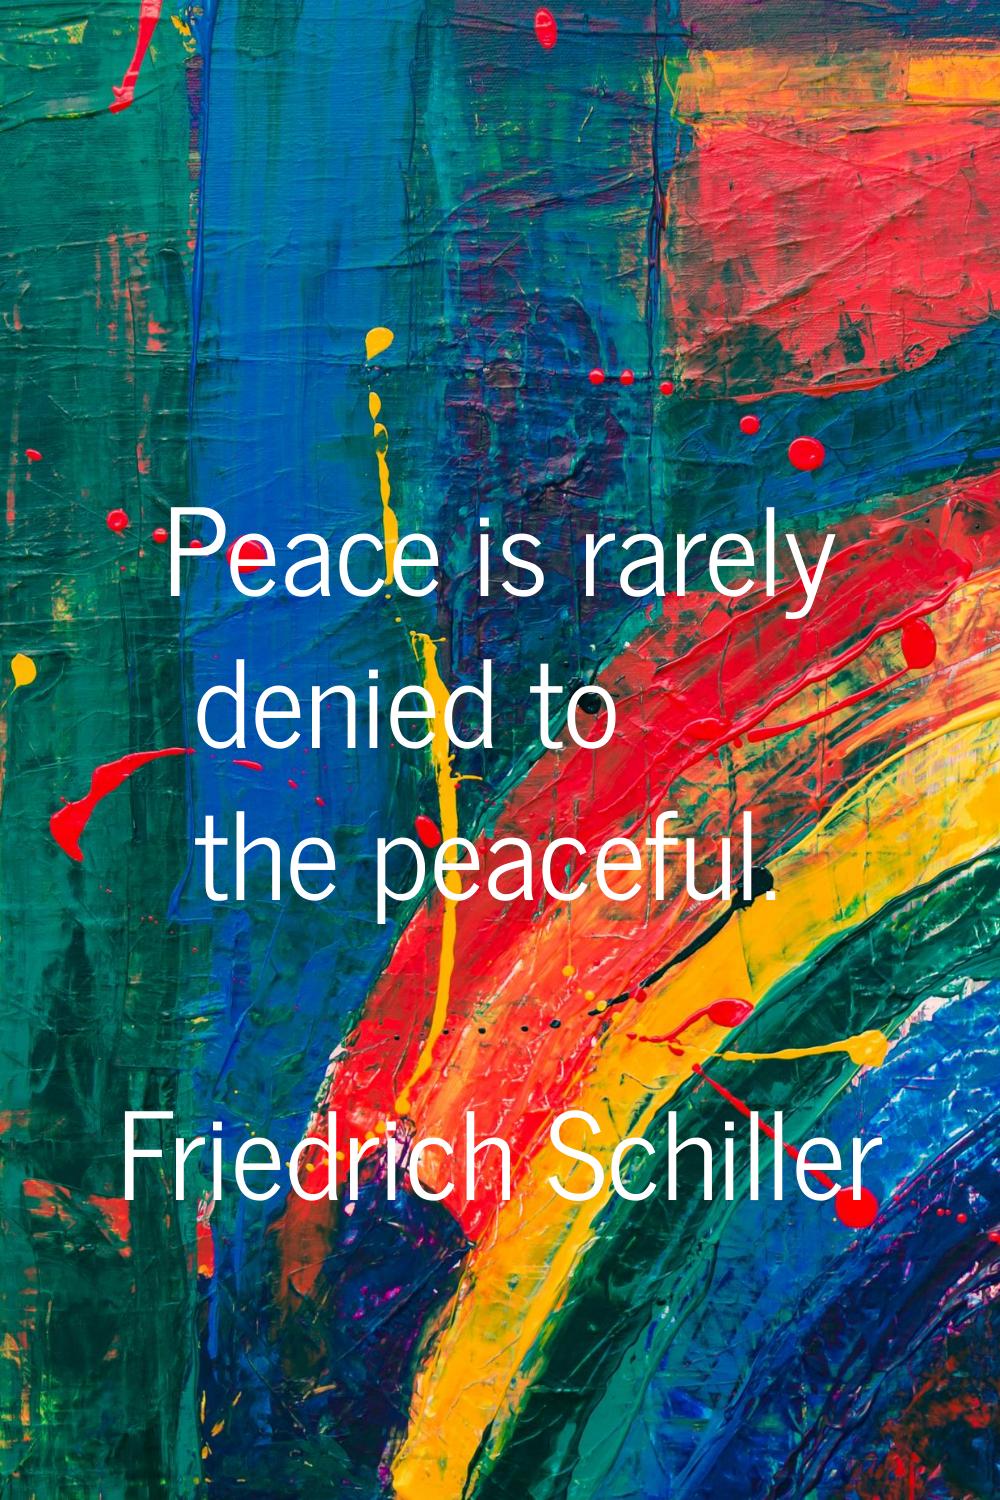 Peace is rarely denied to the peaceful.